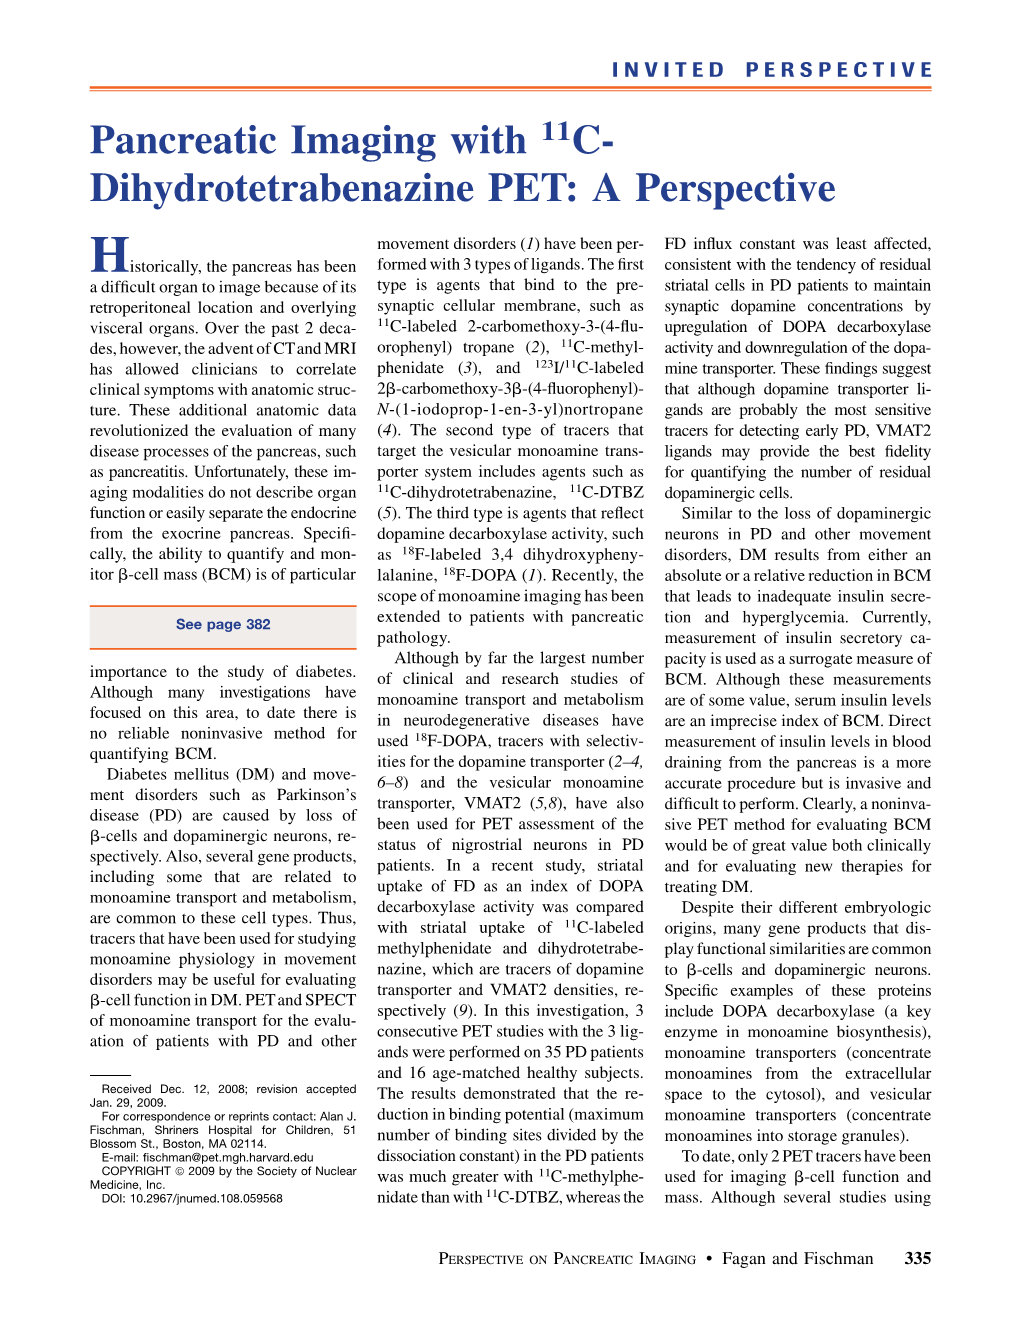 Pancreatic Imaging with 11C- Dihydrotetrabenazine PET: a Perspective